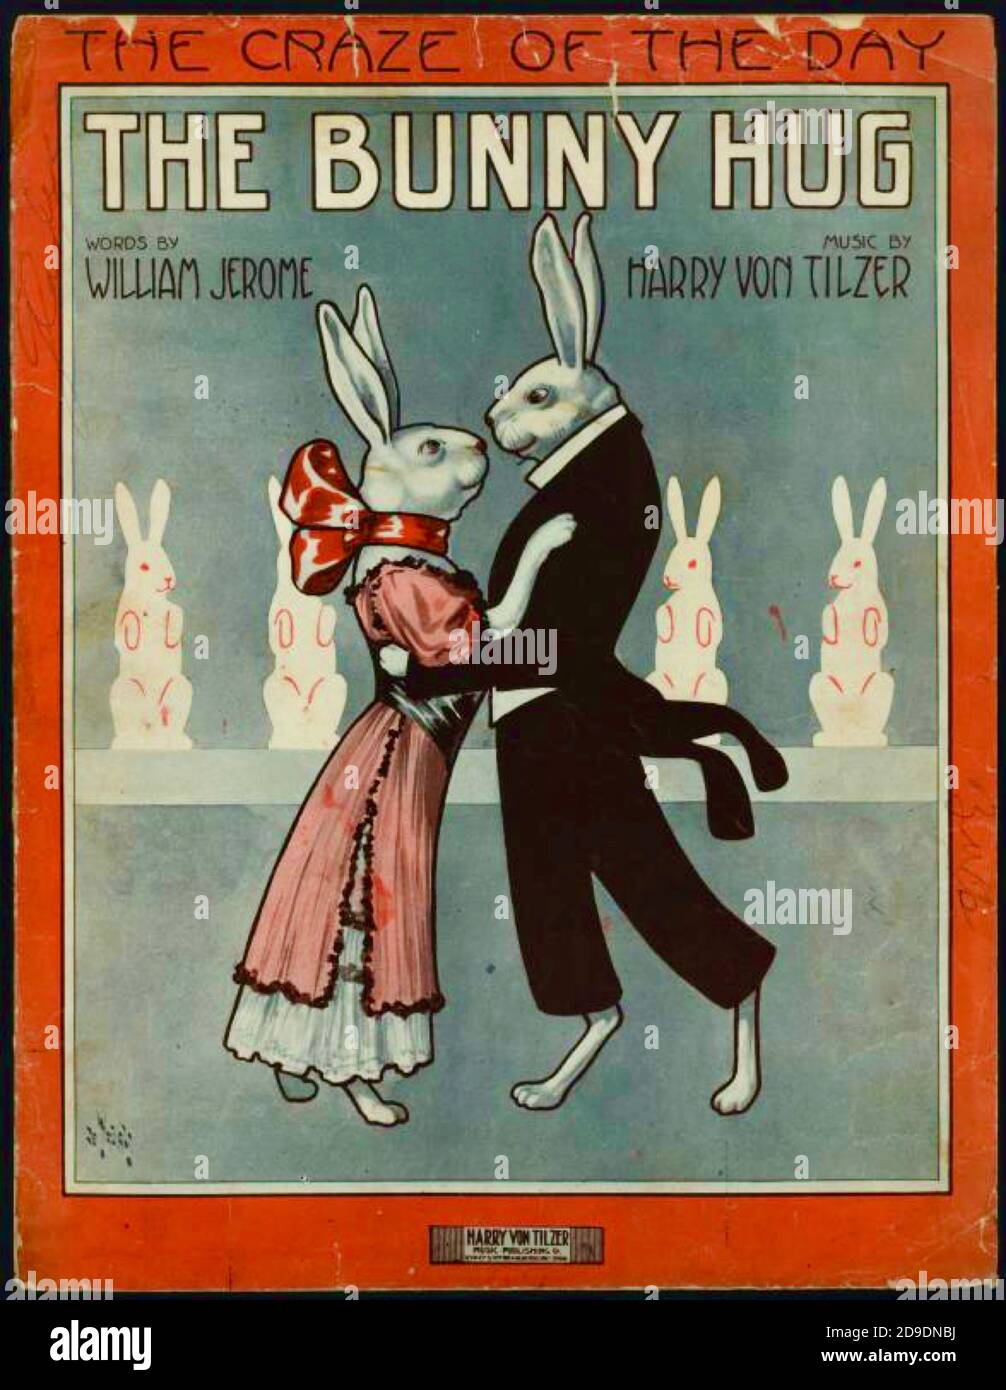 The Bunny Hug - The craze of the day - colour enhanced.  Animals in human situations. Rabbits ballroom dancing, tuxedos courtship and love. Not PC. Stock Photo